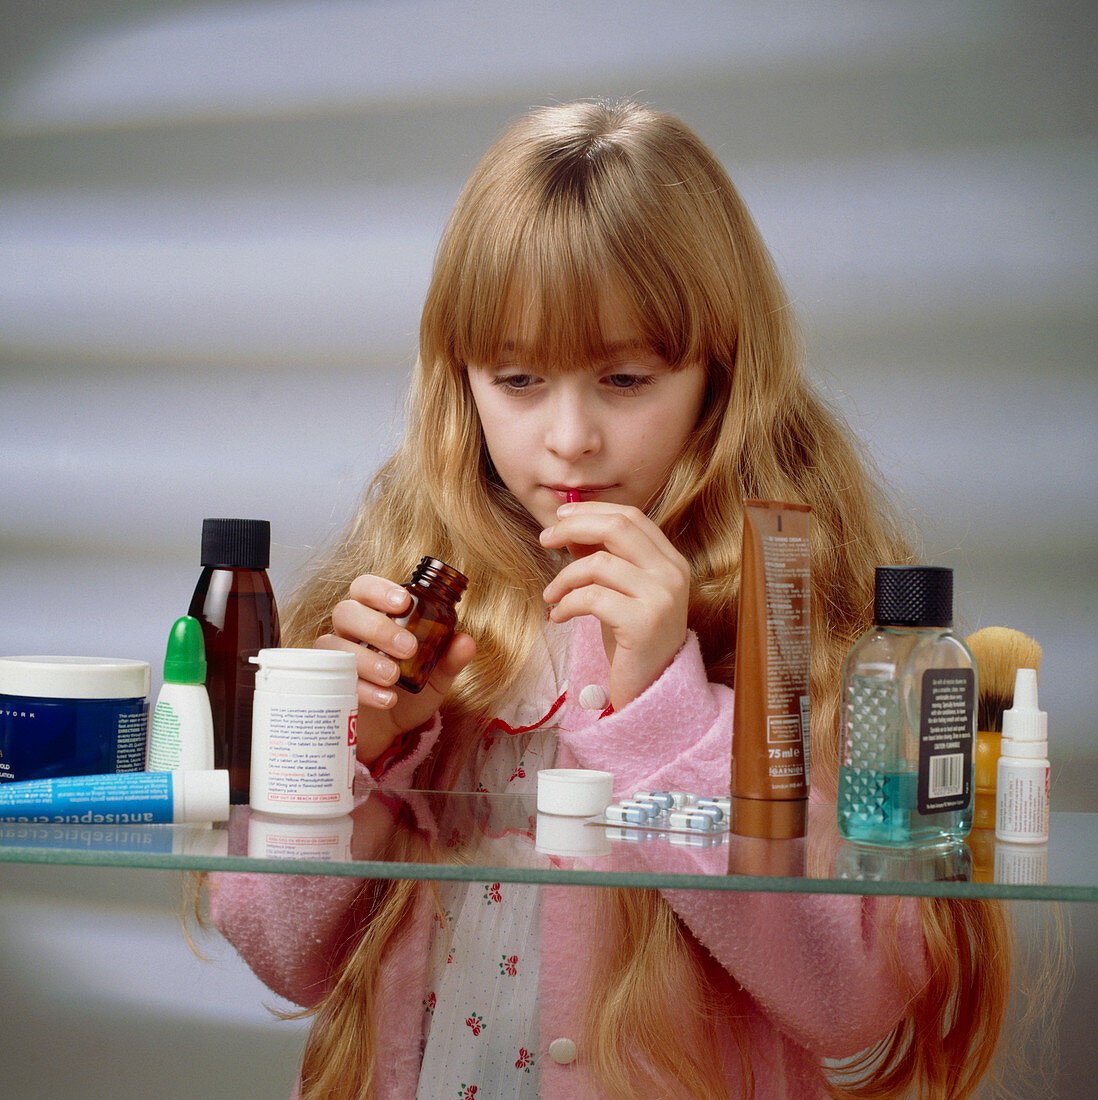 Child danger: young girl finds pills on a shelf